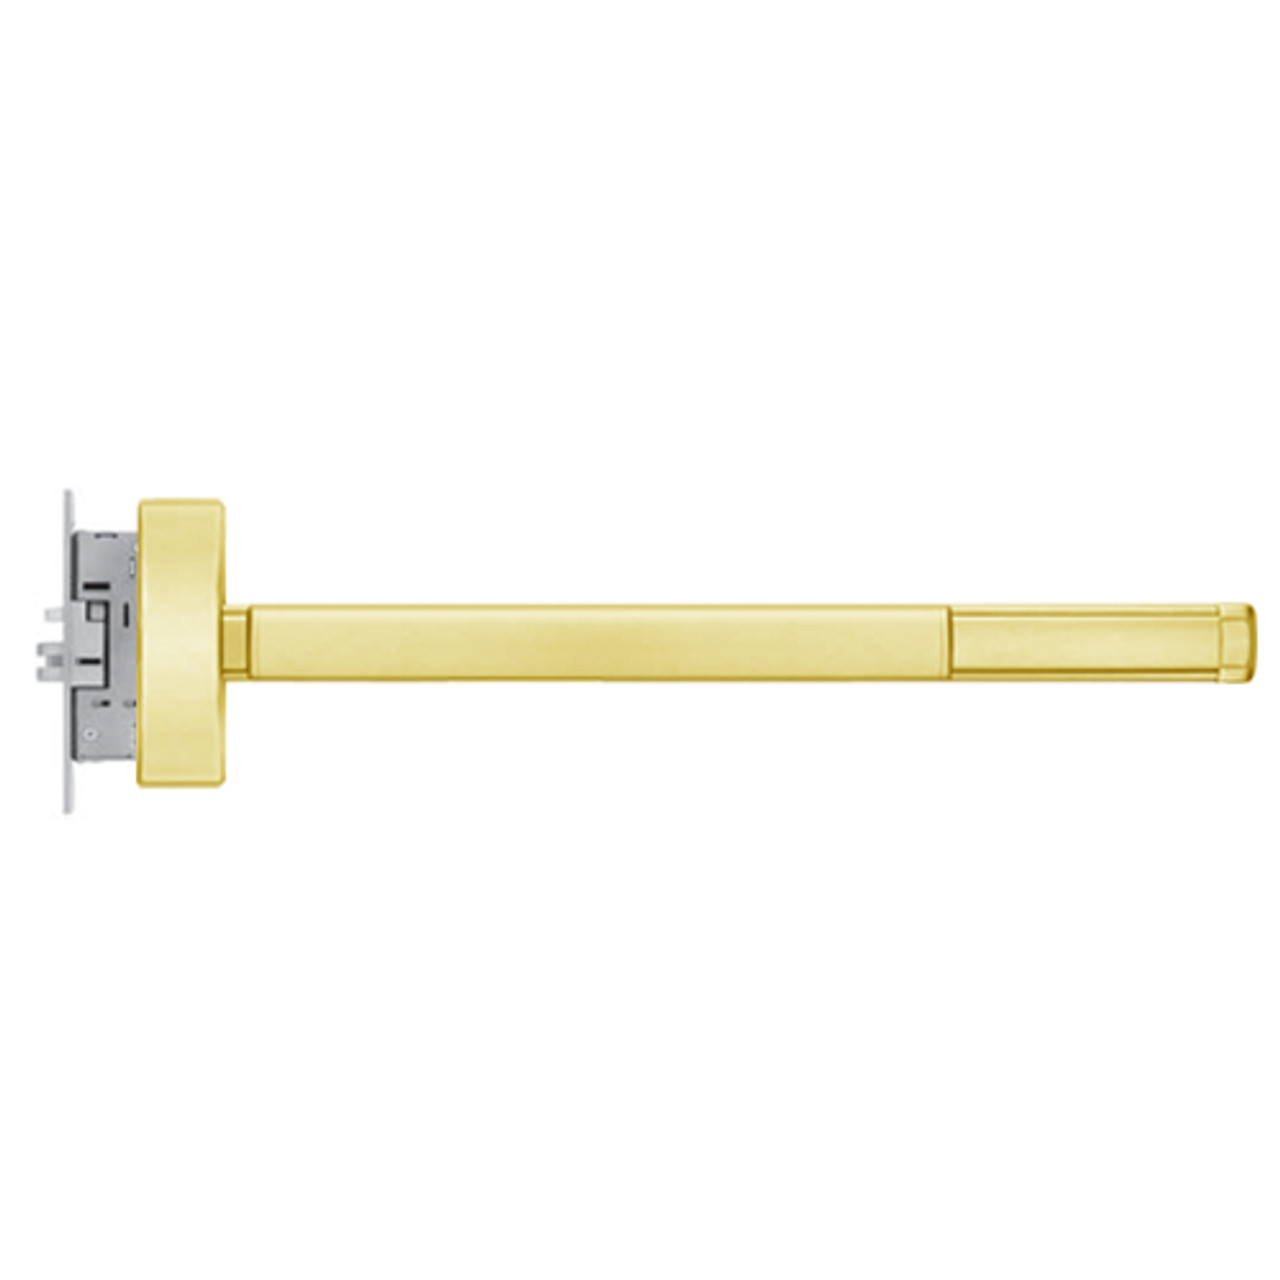 TSFL2302-LHR-605-48 PHI 2300 Series Fire Rated Apex Mortise Exit Device with Touchbar Monitoring Switch Prepped for Dummy Trim in Bright Brass Finish